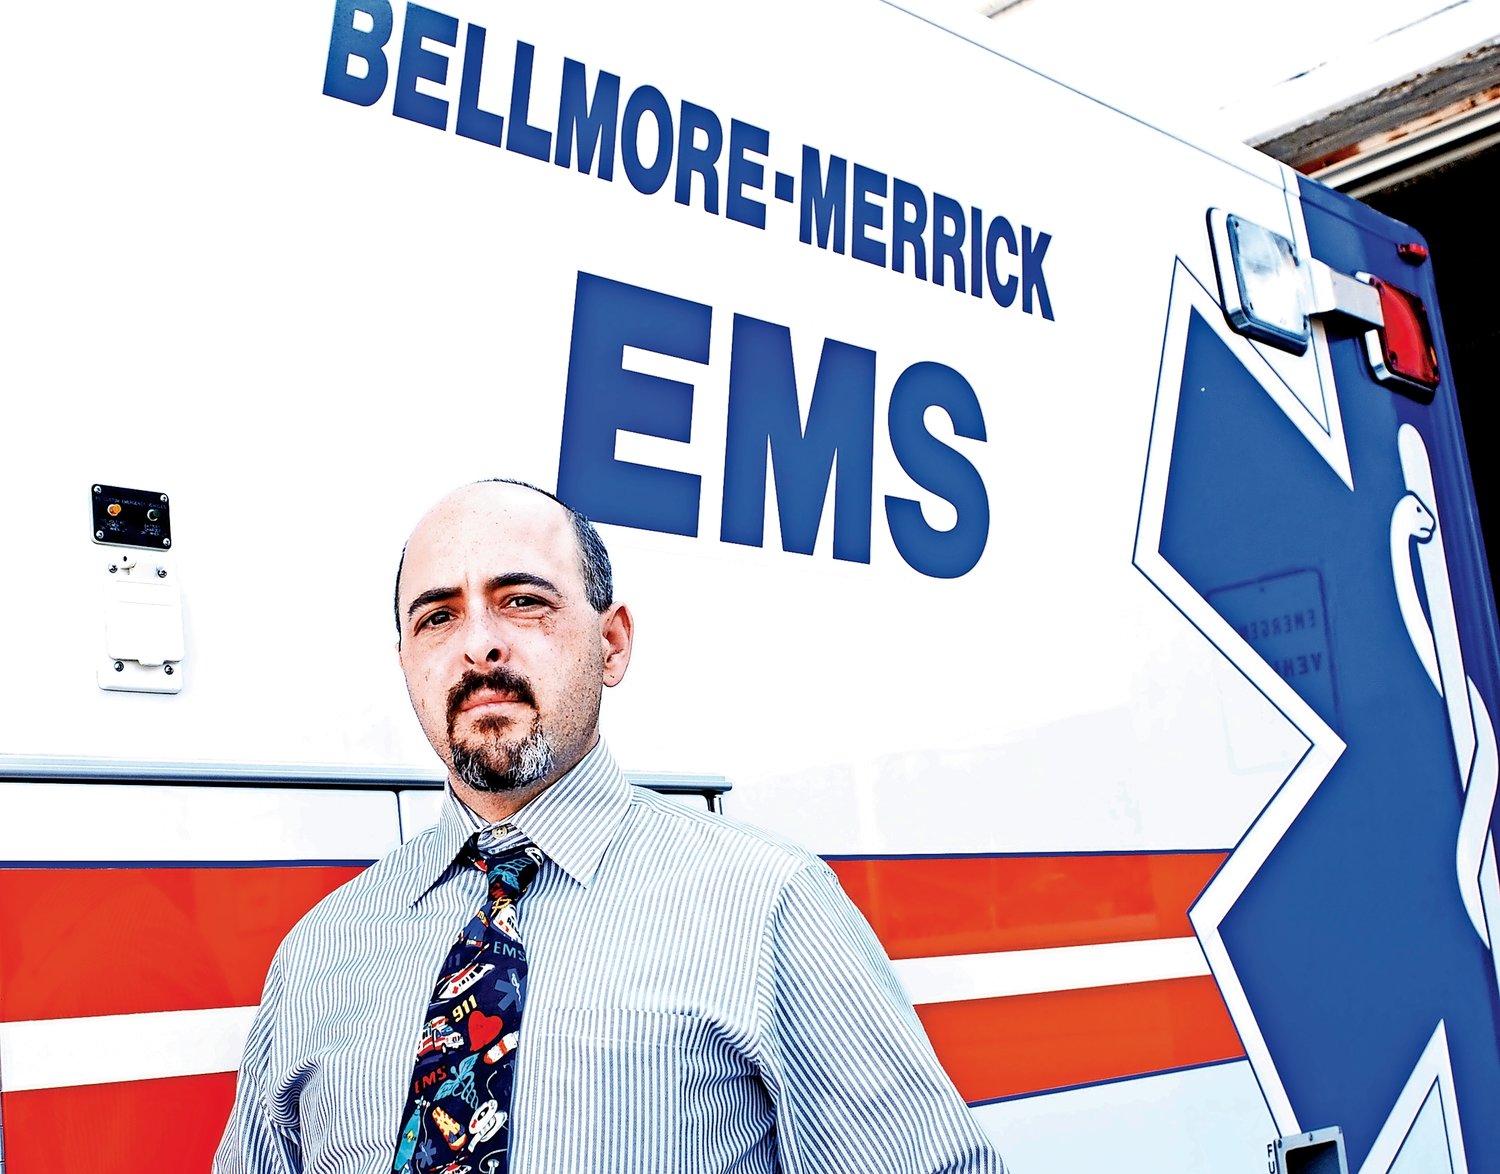 Bellmore-Merrick EMS Assistant Chief Scott Resnik helped the department prepare for the coronavirus outbreak early on, but its funds have still taken a hit. The community has helped relieve the burden by donating money and food.